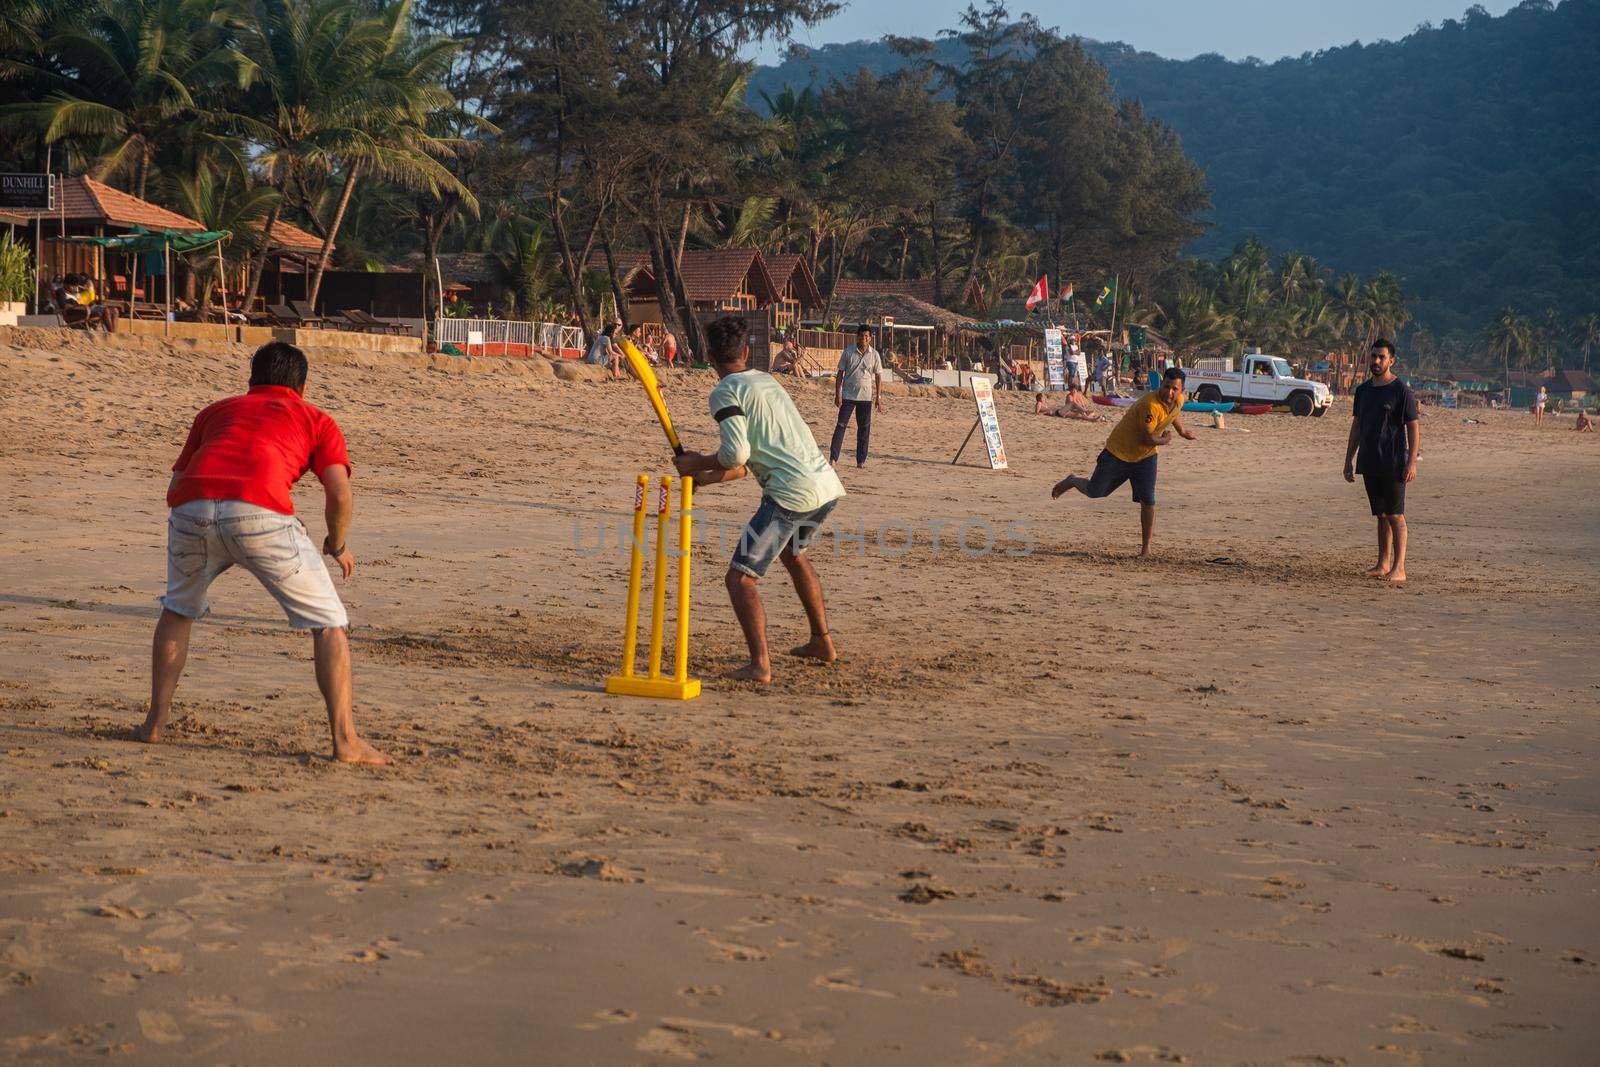 Group of Indian adults playing cricket on beach at sunset by snep_photo